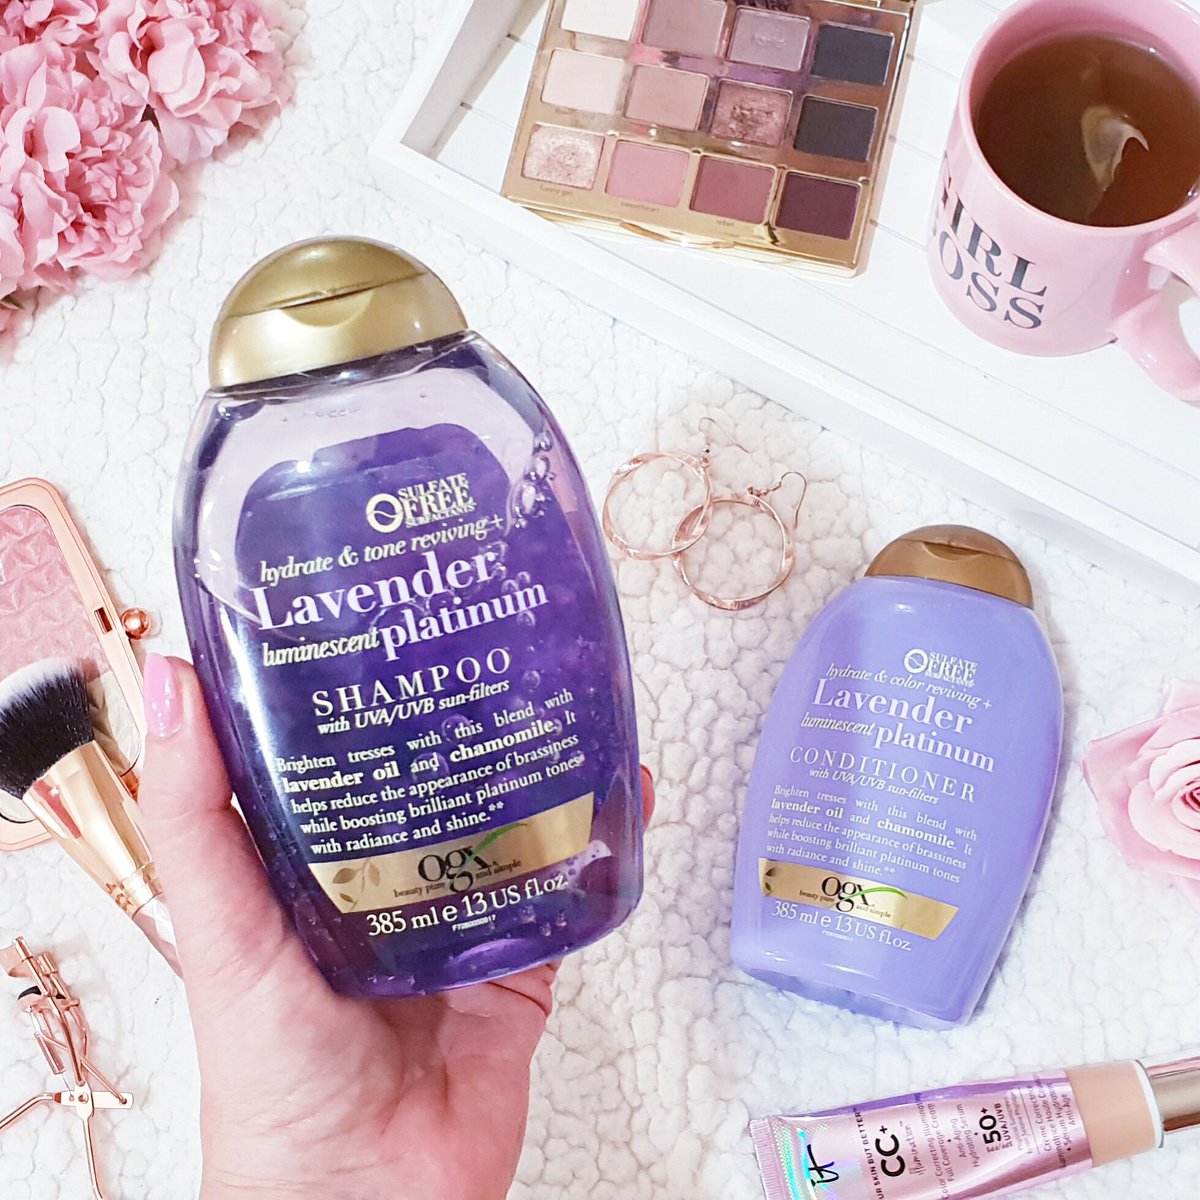 Are you blonde and suffer with brassy tones showing through in between treatments? Here are my thoughts on @OGXBeauty Lavender Shampoo and Conditioner rosieloveslife.co.uk/2018/09/ogx-la… #bbloggers #thegirlgang #bloggerssparkle @BLOGGERSCIRCLE_ @UKBloggers1